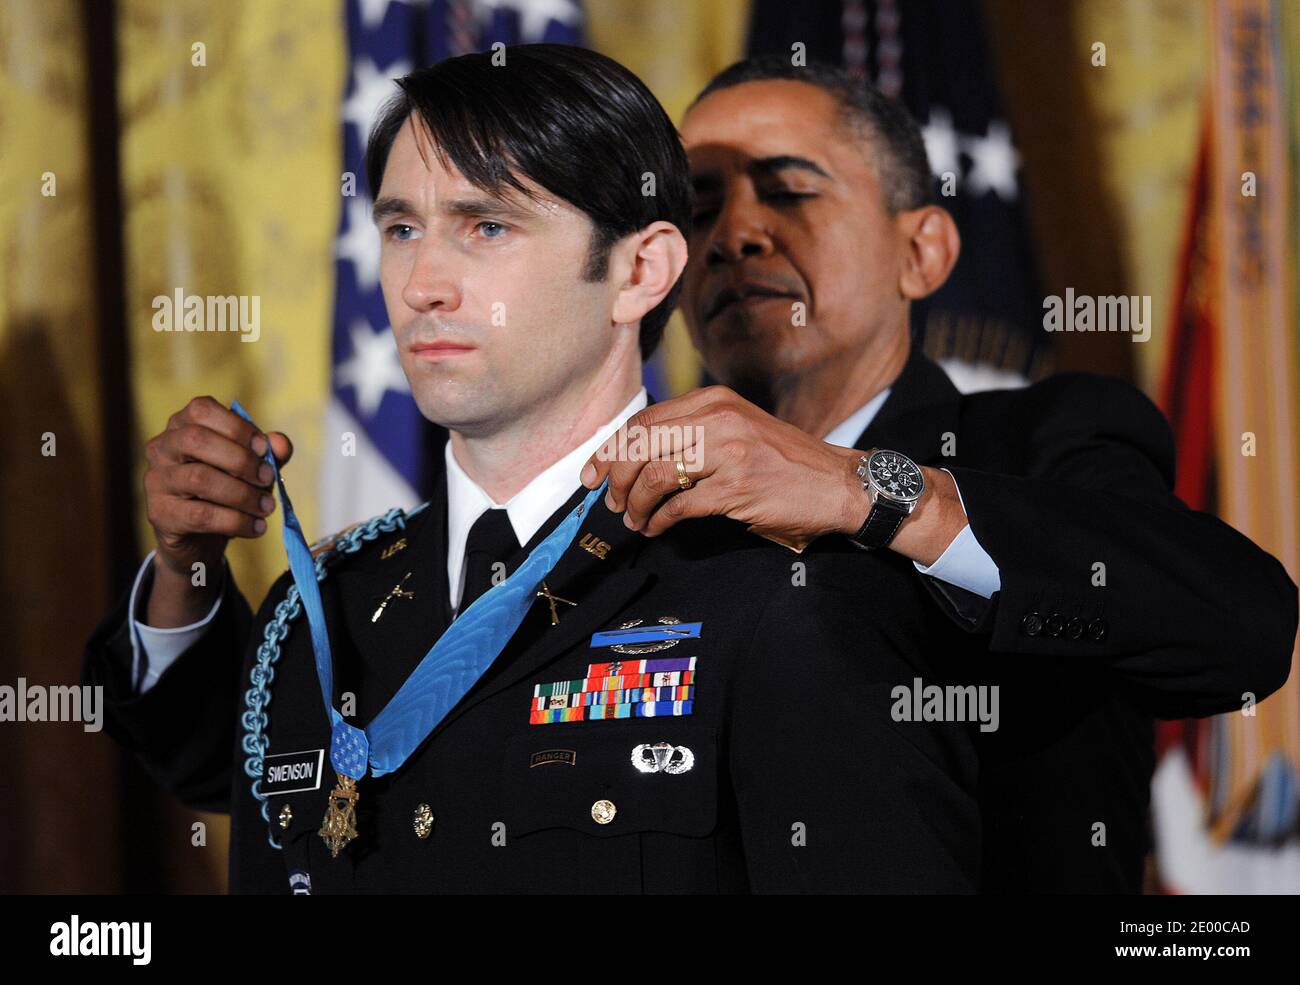 President Barack Obama awards Captain William Swenson, U.S. Army, the Medal of Honor during an ceremony in the East Room of the White House in Washington, DC, USA, October 15, 2013.Photo by Olivier Douliery/ABACAPRESS.COM Stock Photo